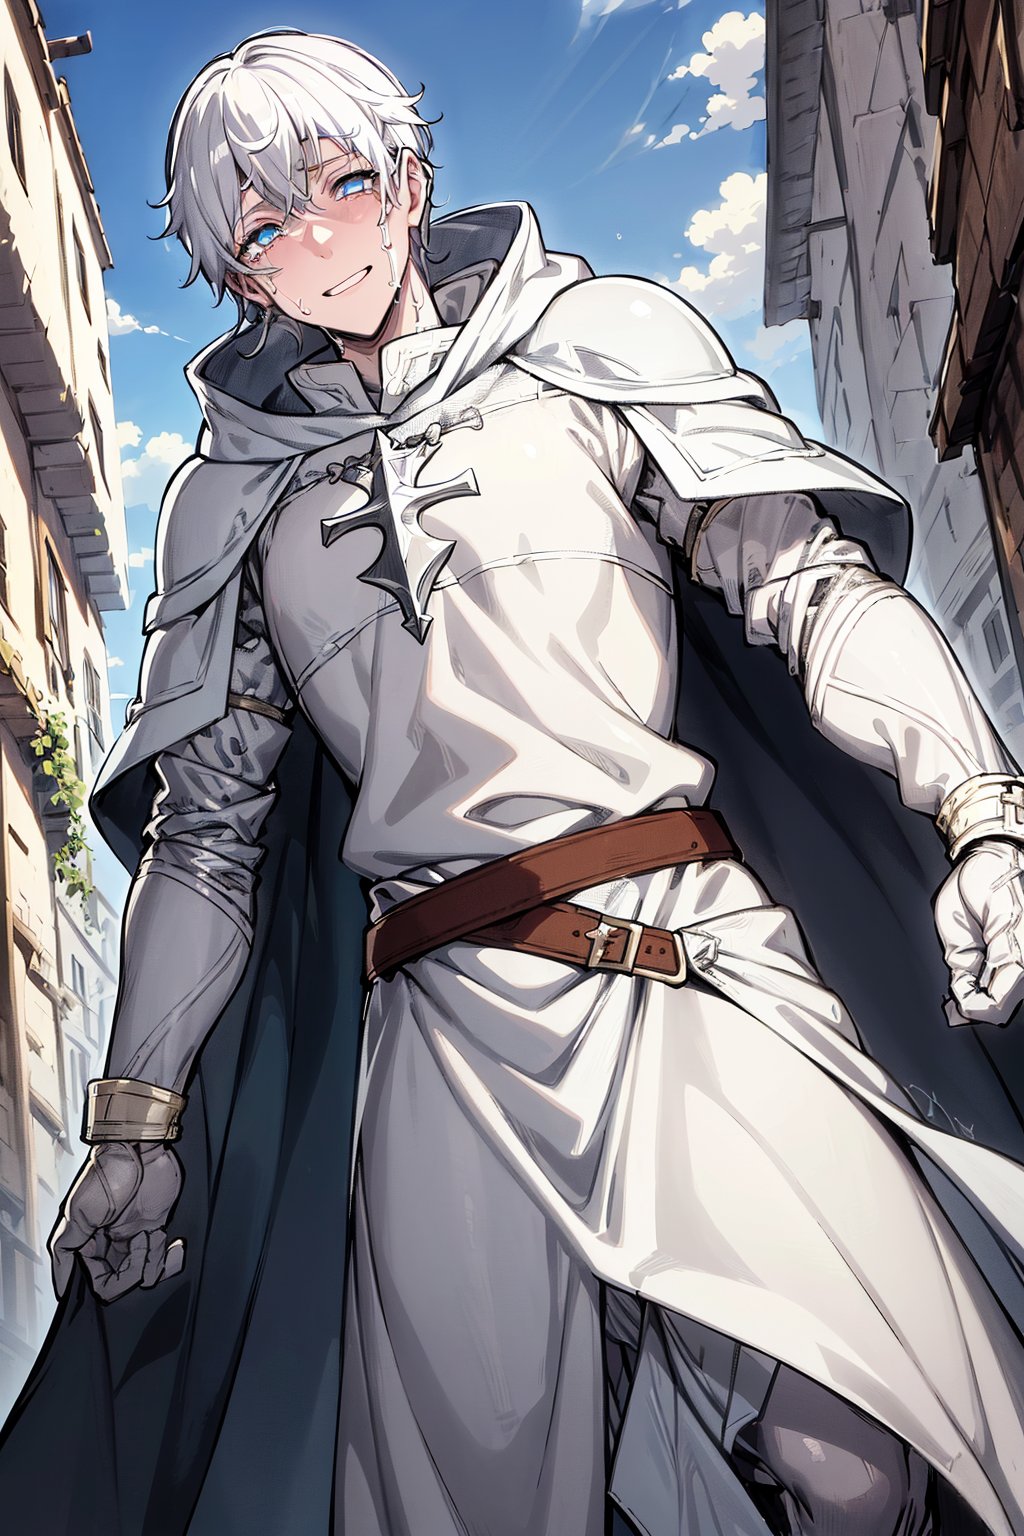 man, white hair, albino (happy expression, with tears in his eyes), dressed in ((silver armor)), (a light blue cloak), in the middle of a (medieval town),